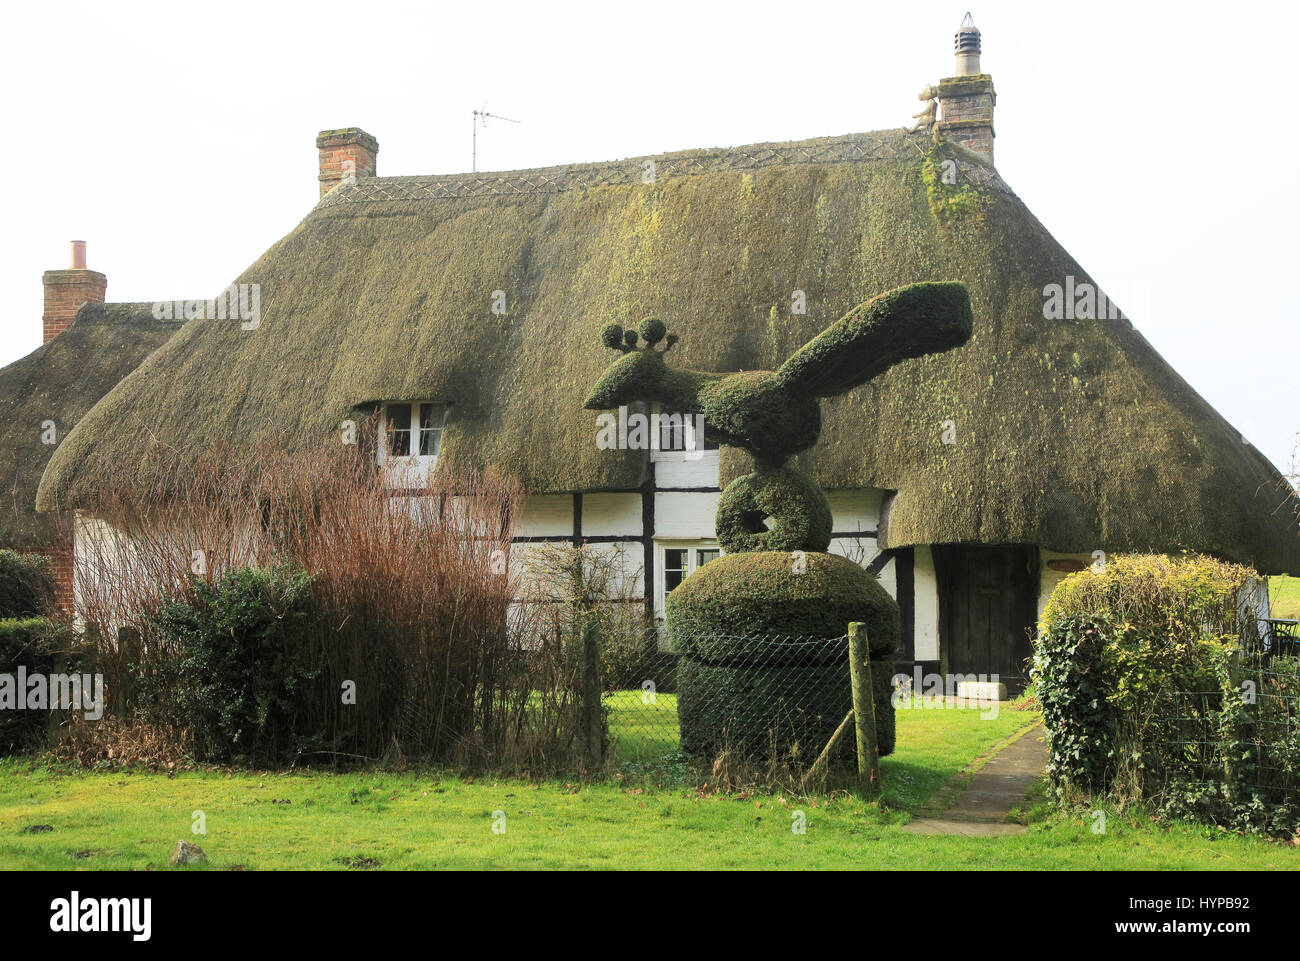 Topiary hedging thatched country cottage, Cadley, near Marlborough, Wiltshire, England, UK Stock Photo